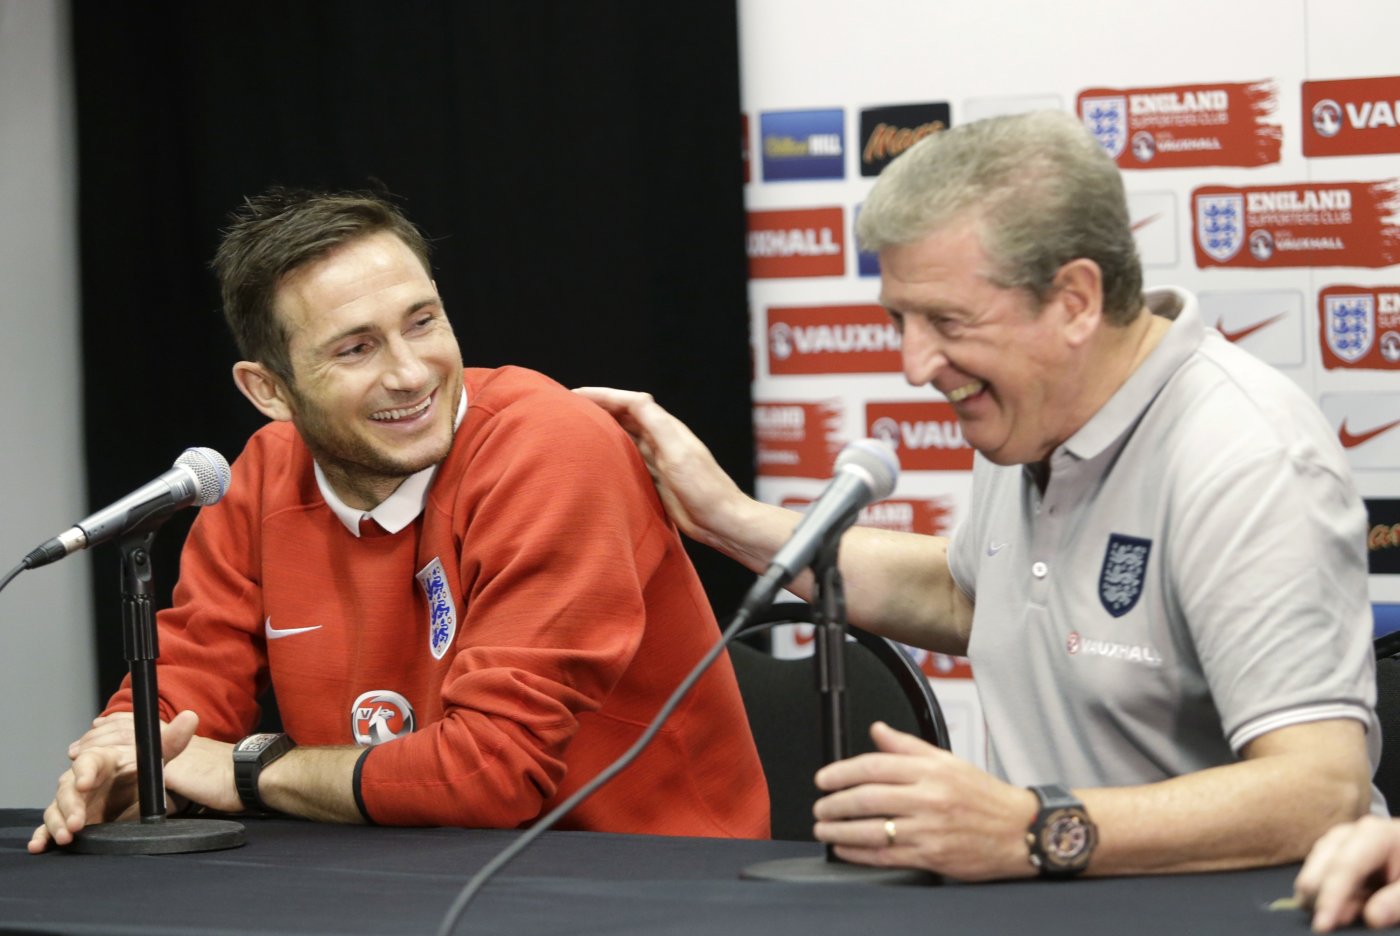 England manager Roy Hodgson, right, shares a laugh with player Frank Lampard during a news conference, Tuesday, June 3, 2014 in Miami Gardens, Fla. England plays matches at Sun Life Stadium, against Ecuador on Wednesday and Honduras on Saturday. (AP Photo/Wilfredo Lee)